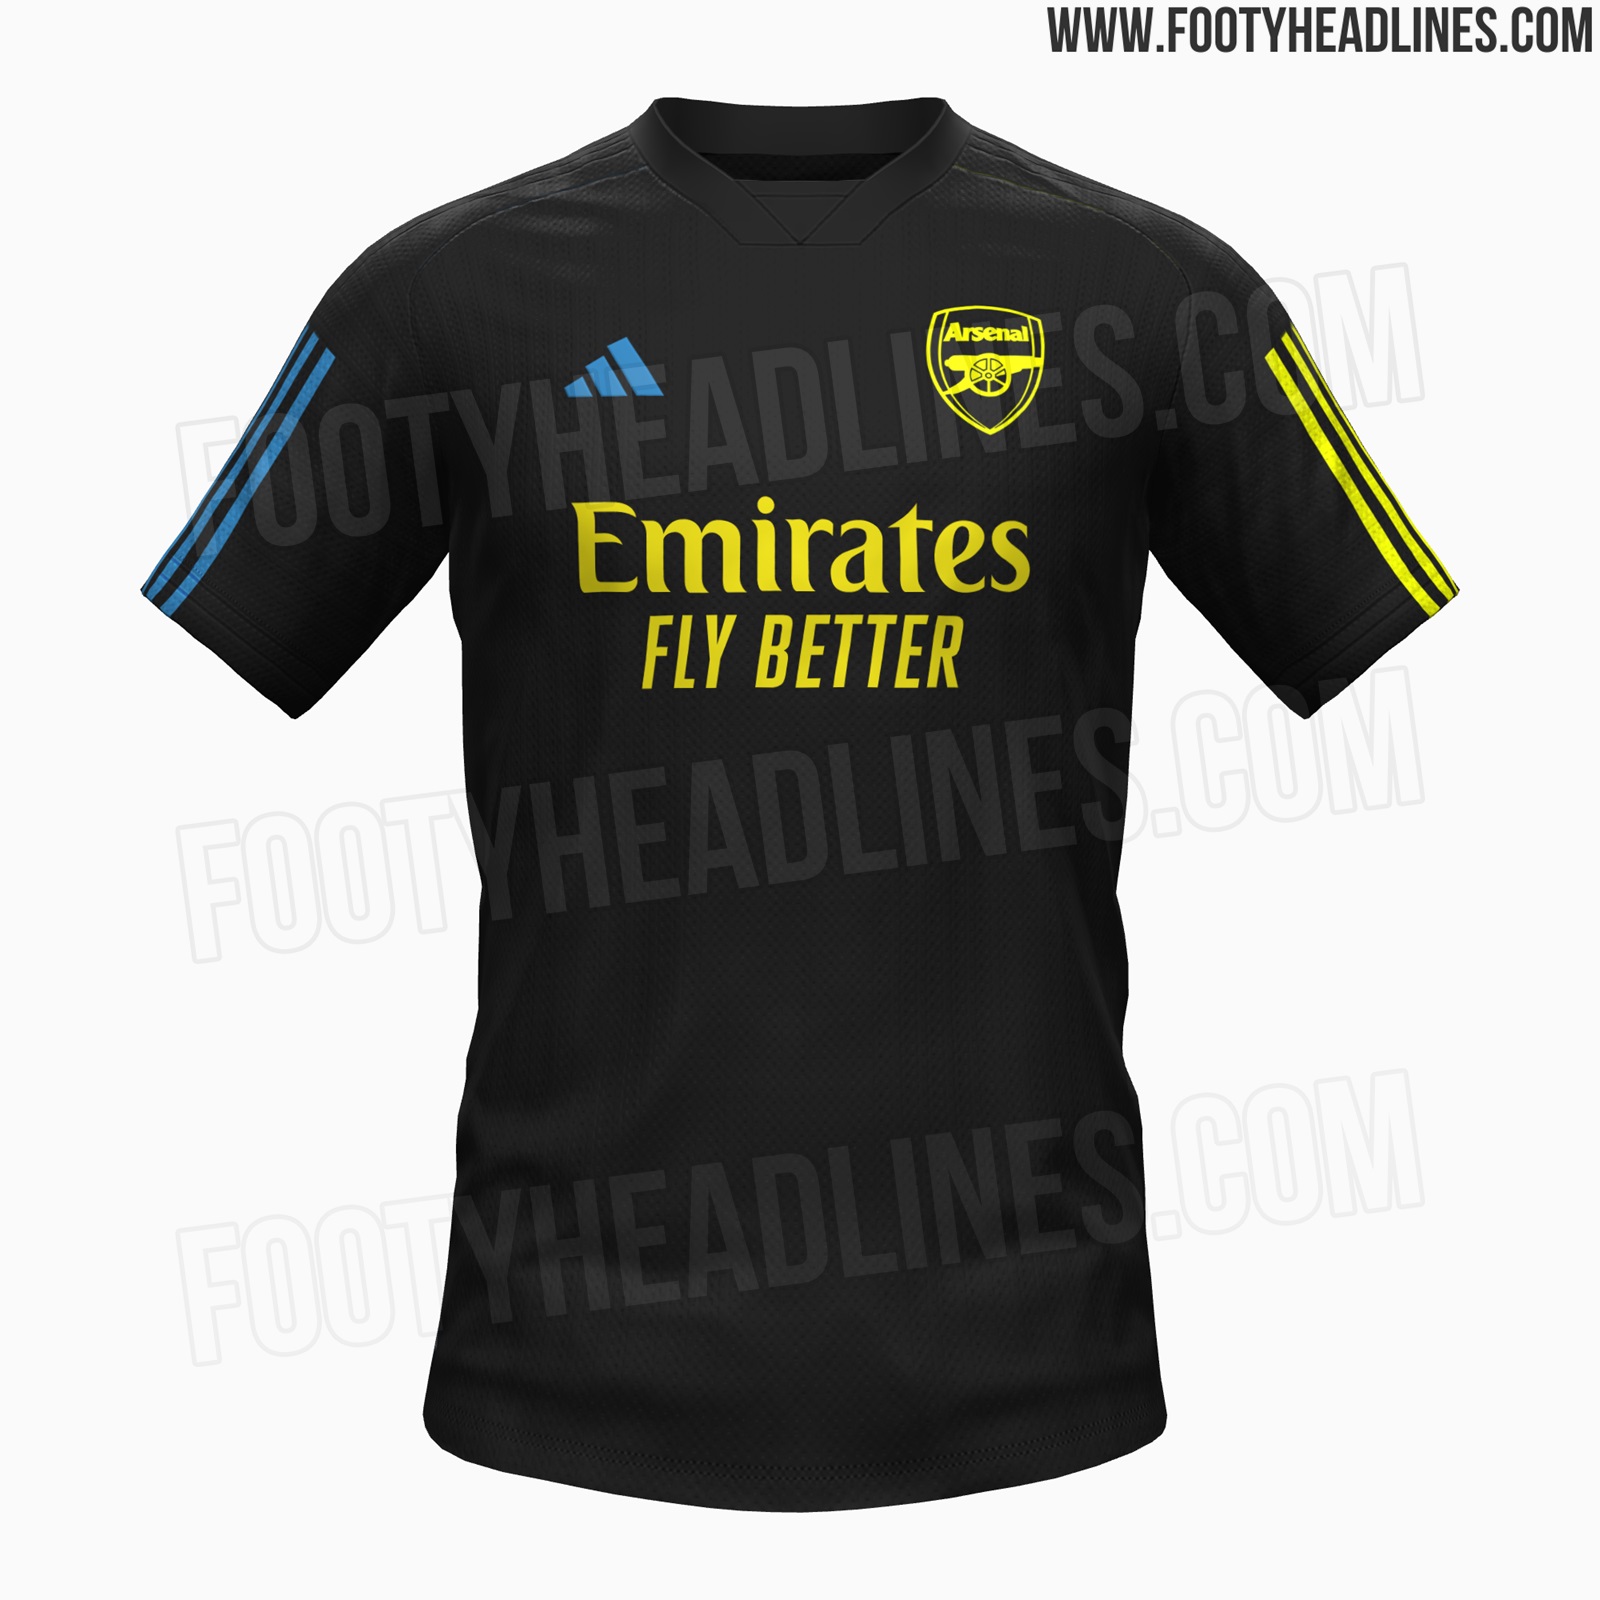 Arsenal Women will be given new training kit this season after